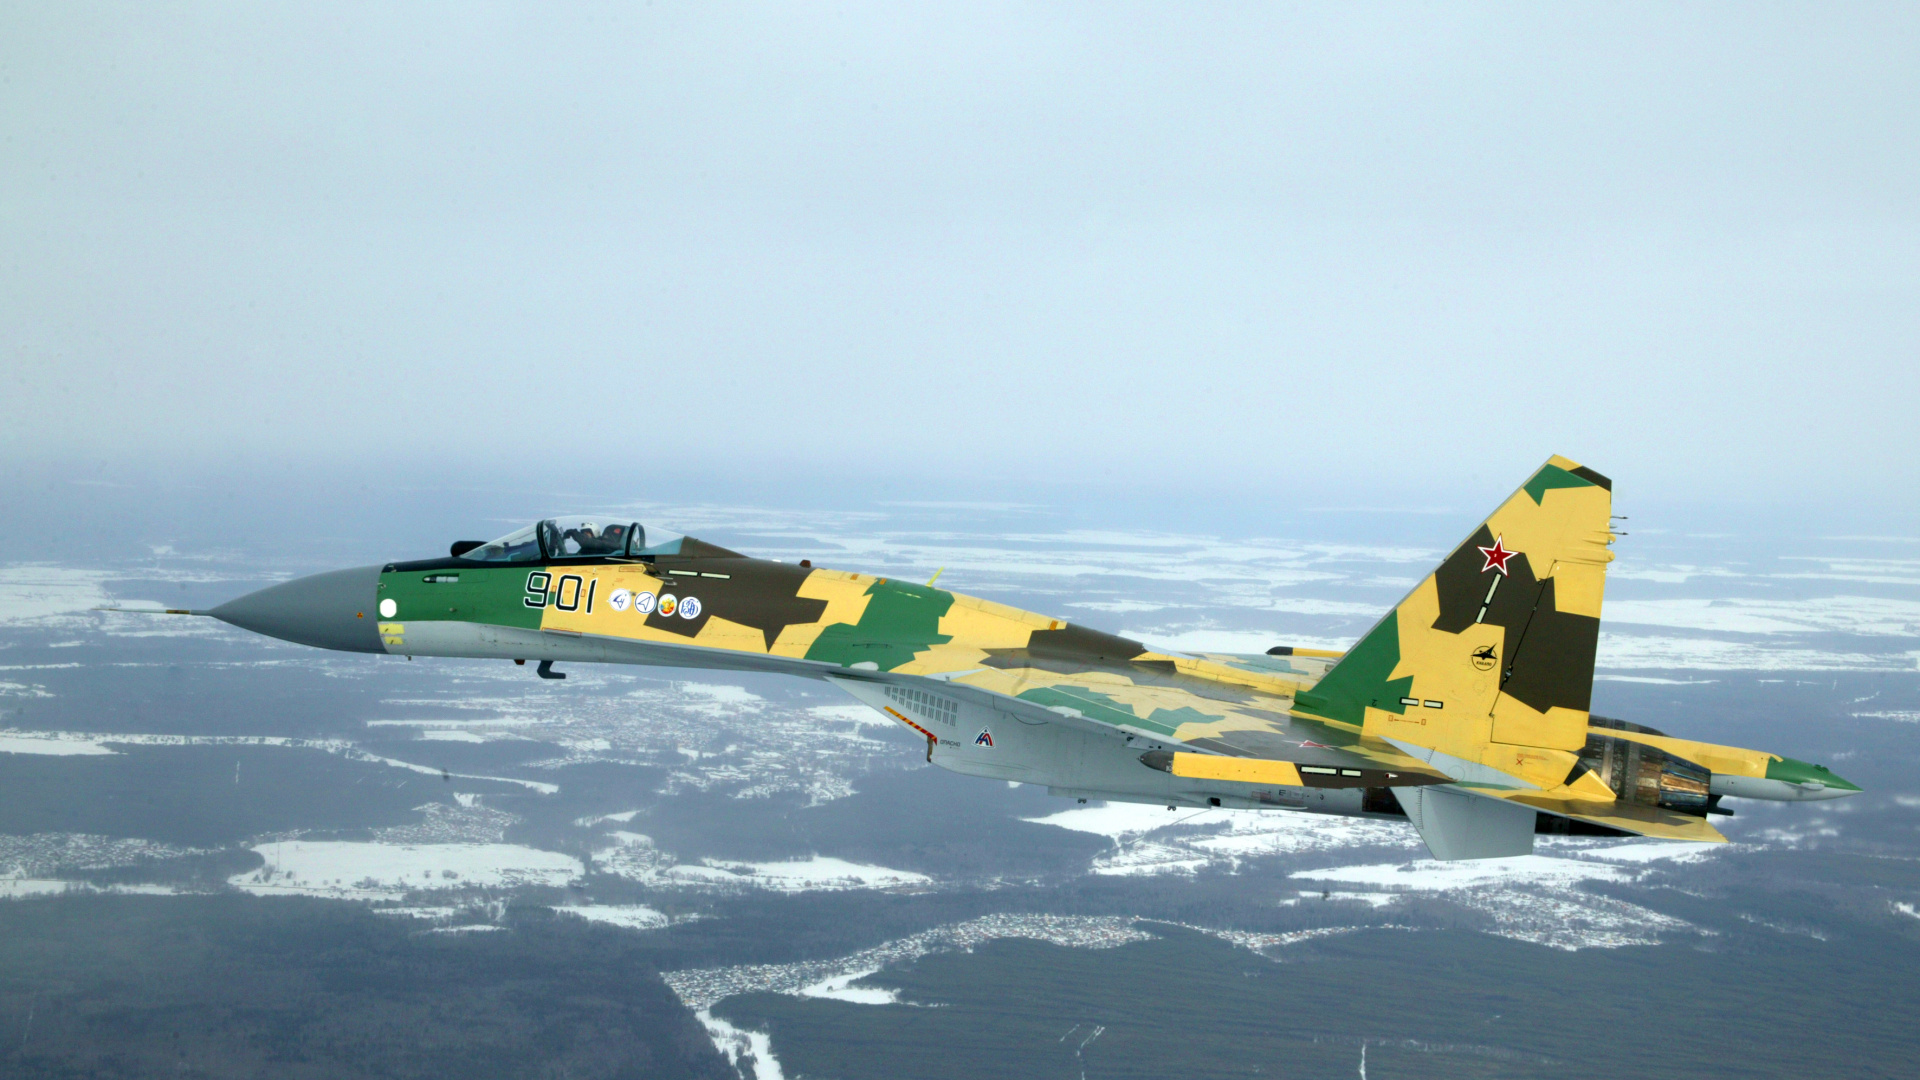 Green and Yellow Fighter Plane on Mid Air During Daytime. Wallpaper in 1920x1080 Resolution